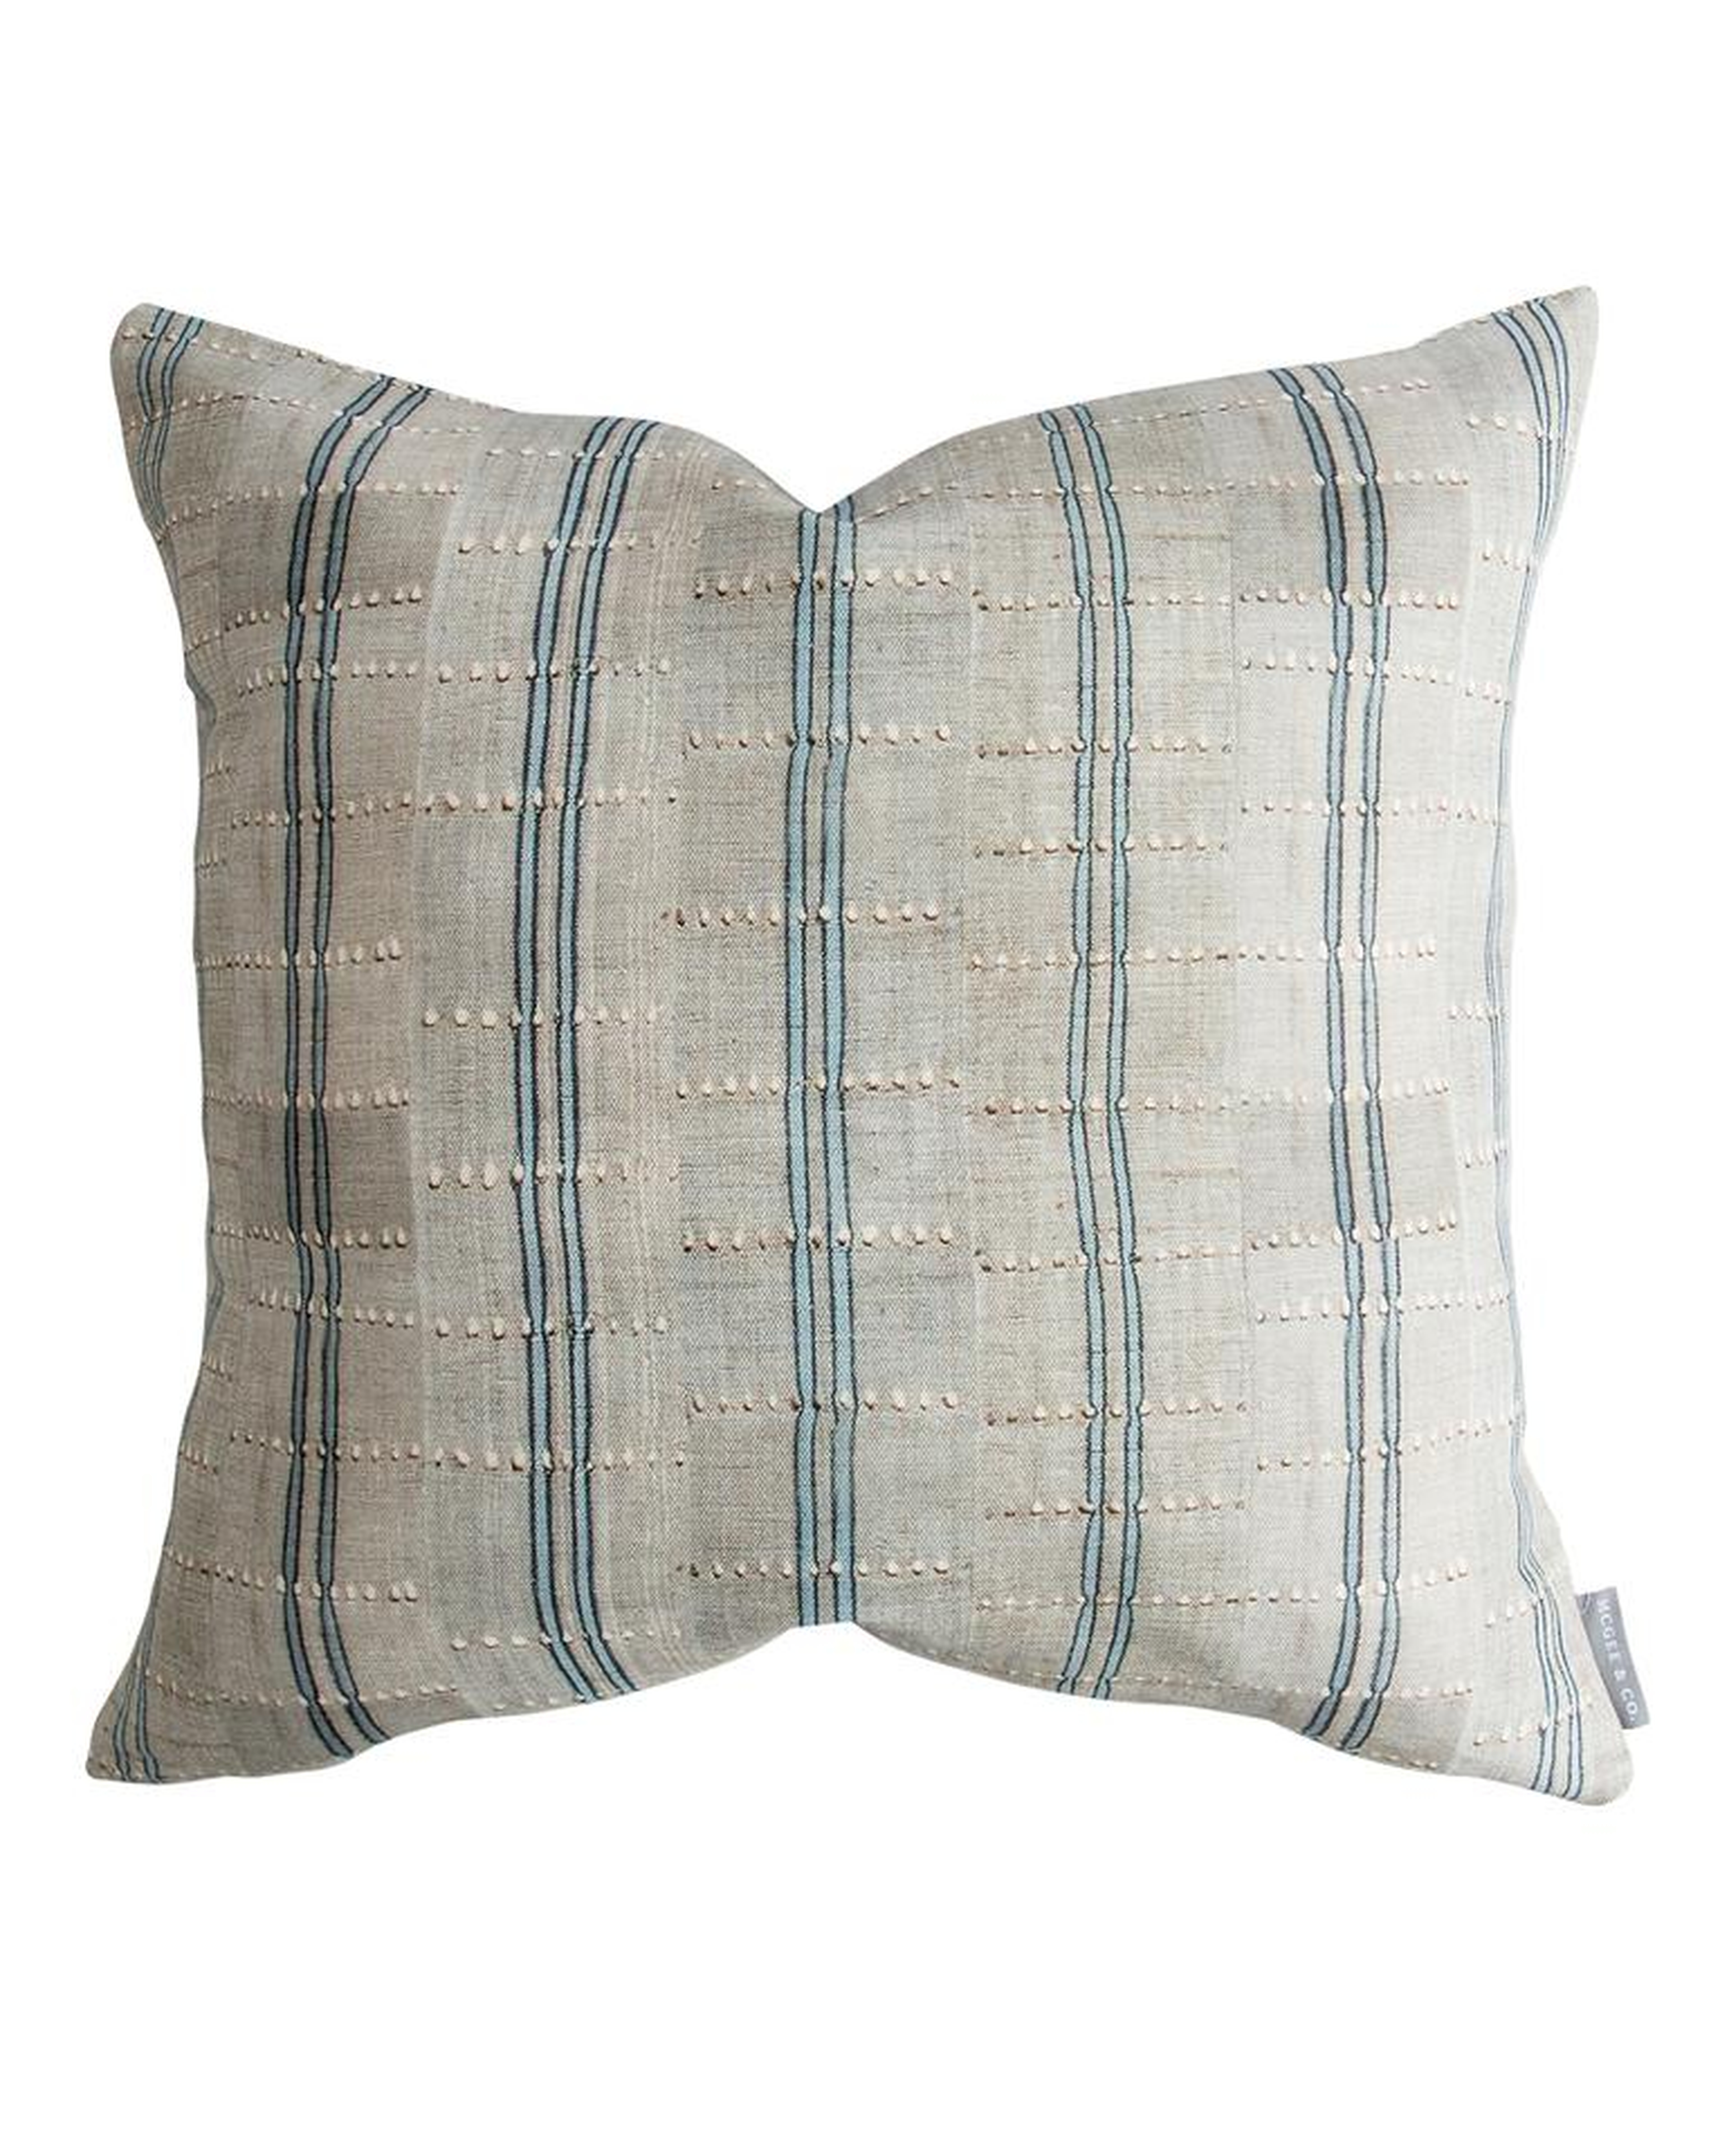 CHARLIE PILLOW WITHOUT INSERT, 24" x 24" - McGee & Co.